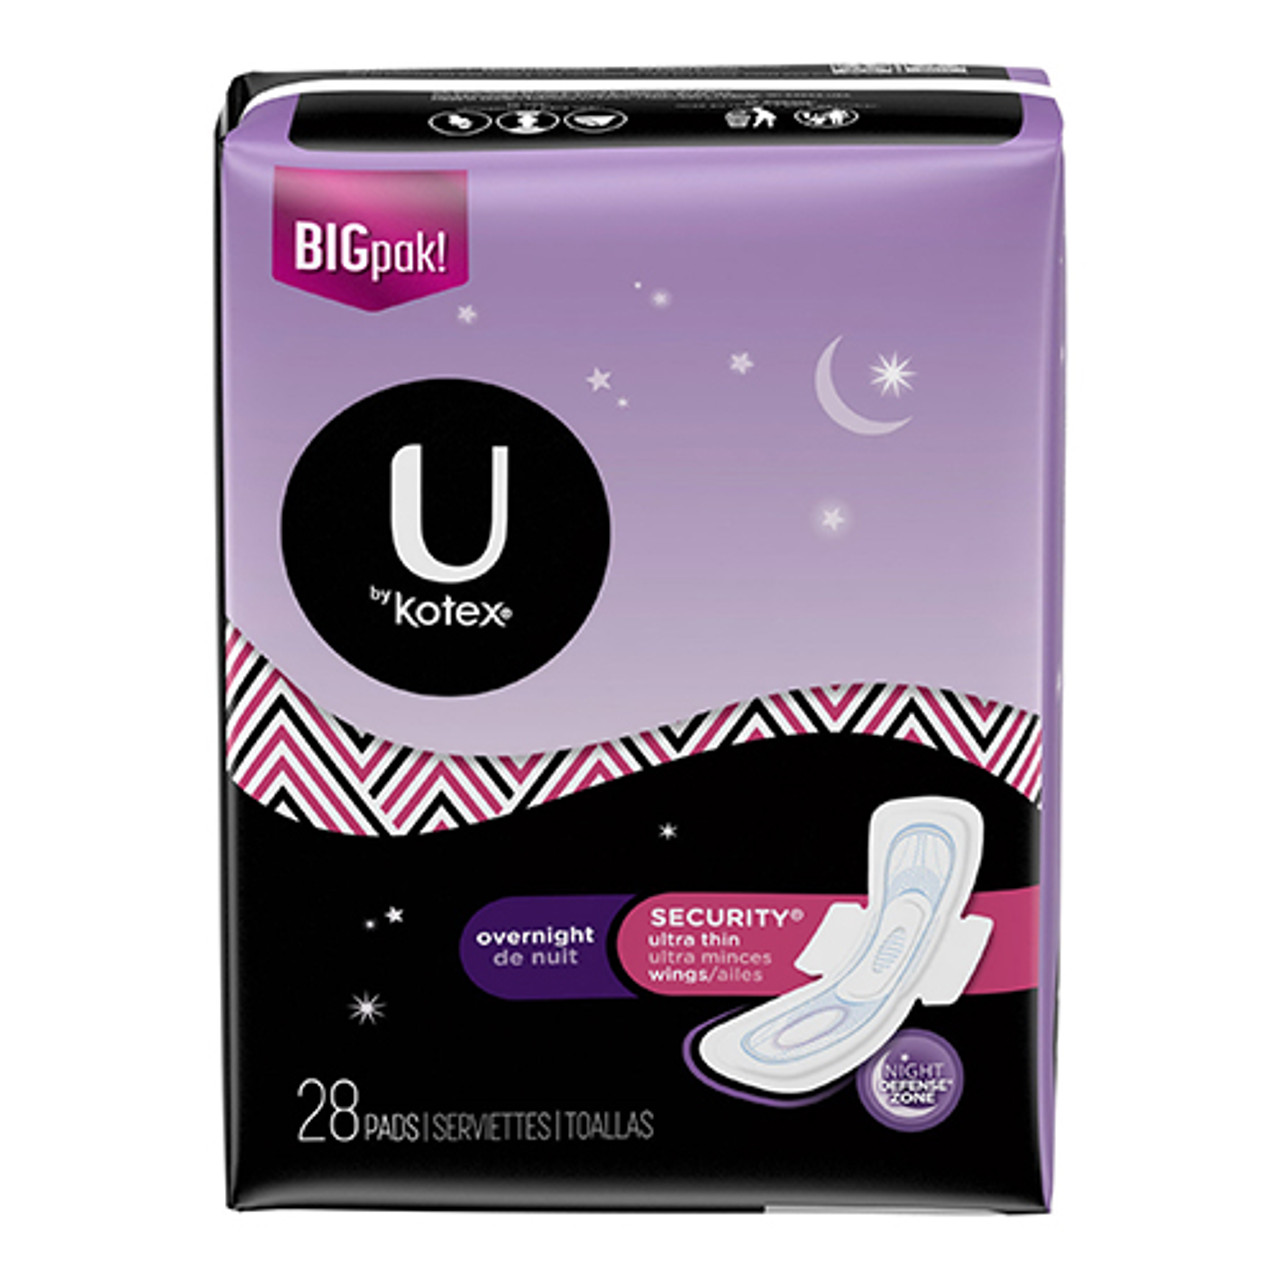 U by Kotex All Nighter Ultra Thin Pads Overnight With Wings 28